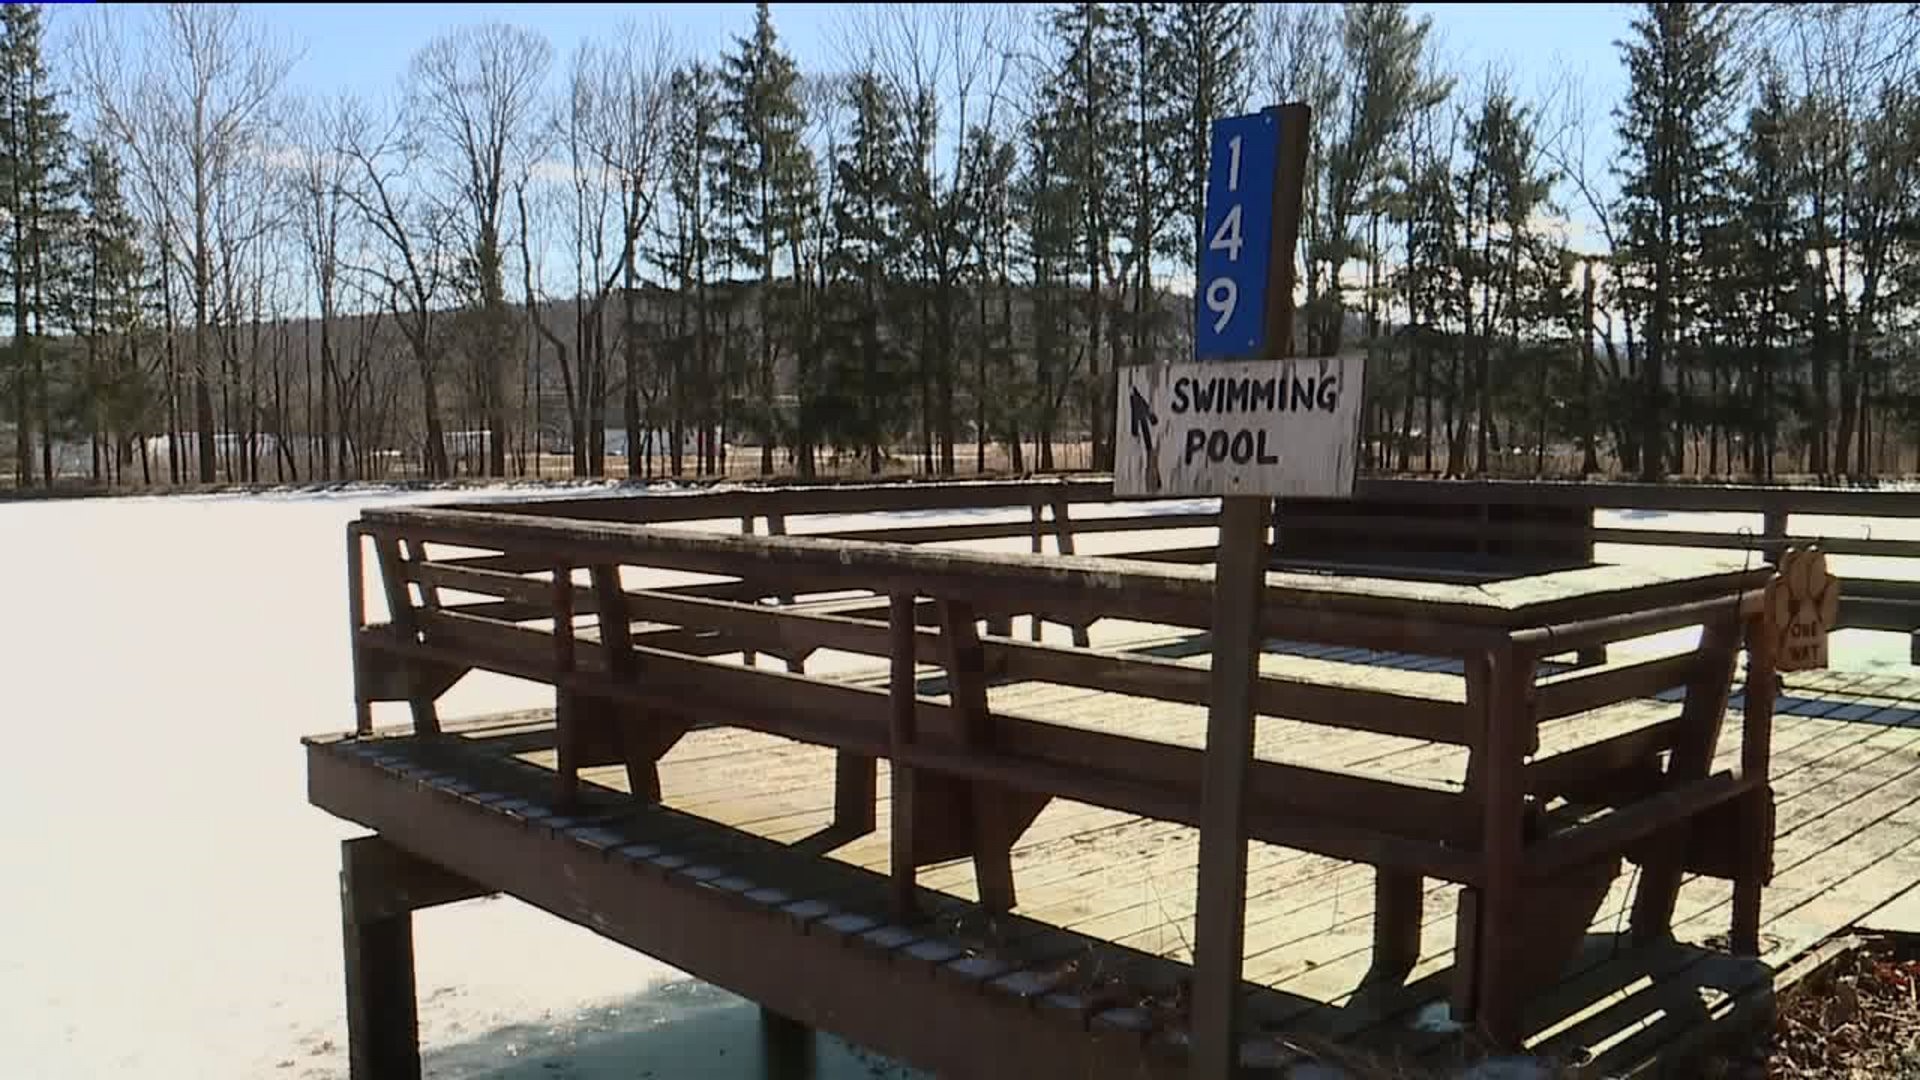 Animal Shelter in the Poconos Hoping for Big Turnout for Annual Polar Plunge